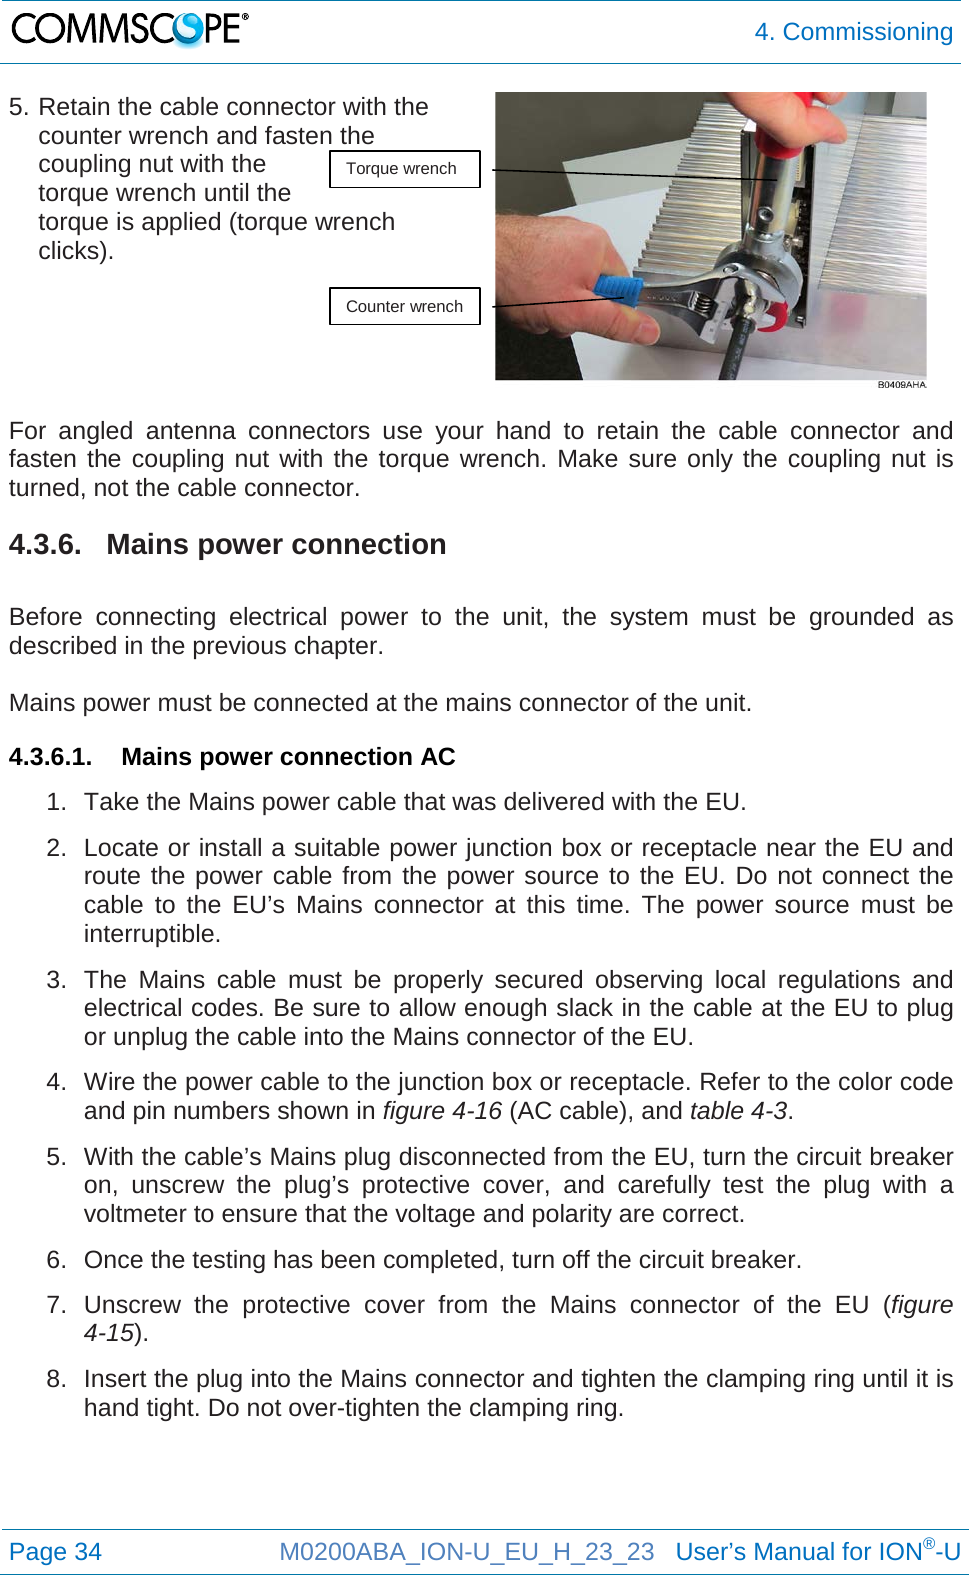  4. Commissioning  Page 34 M0200ABA_ION-U_EU_H_23_23   User’s Manual for ION®-U  5. Retain the cable connector with the counter wrench and fasten the coupling nut with the torque wrench until the  torque is applied (torque wrench clicks).    For angled antenna connectors use your hand to retain the cable connector and fasten the coupling nut with the torque wrench. Make sure only the coupling nut is turned, not the cable connector. 4.3.6. Mains power connection  Before connecting electrical power to the unit, the system must be grounded as described in the previous chapter.  Mains power must be connected at the mains connector of the unit. 4.3.6.1. Mains power connection AC 1. Take the Mains power cable that was delivered with the EU. 2. Locate or install a suitable power junction box or receptacle near the EU and route the power cable from the power source to the EU. Do not connect the cable to the EU’s Mains connector at this time. The power source must be interruptible. 3. The Mains cable must be properly secured observing local regulations and electrical codes. Be sure to allow enough slack in the cable at the EU to plug or unplug the cable into the Mains connector of the EU. 4. Wire the power cable to the junction box or receptacle. Refer to the color code and pin numbers shown in figure 4-16 (AC cable), and table 4-3. 5. With the cable’s Mains plug disconnected from the EU, turn the circuit breaker on, unscrew the plug’s protective cover, and carefully test the plug with a voltmeter to ensure that the voltage and polarity are correct. 6. Once the testing has been completed, turn off the circuit breaker. 7. Unscrew the protective cover from the Mains connector of the EU (figure 4-15). 8. Insert the plug into the Mains connector and tighten the clamping ring until it is hand tight. Do not over-tighten the clamping ring.    Torque wrench Counter wrench 